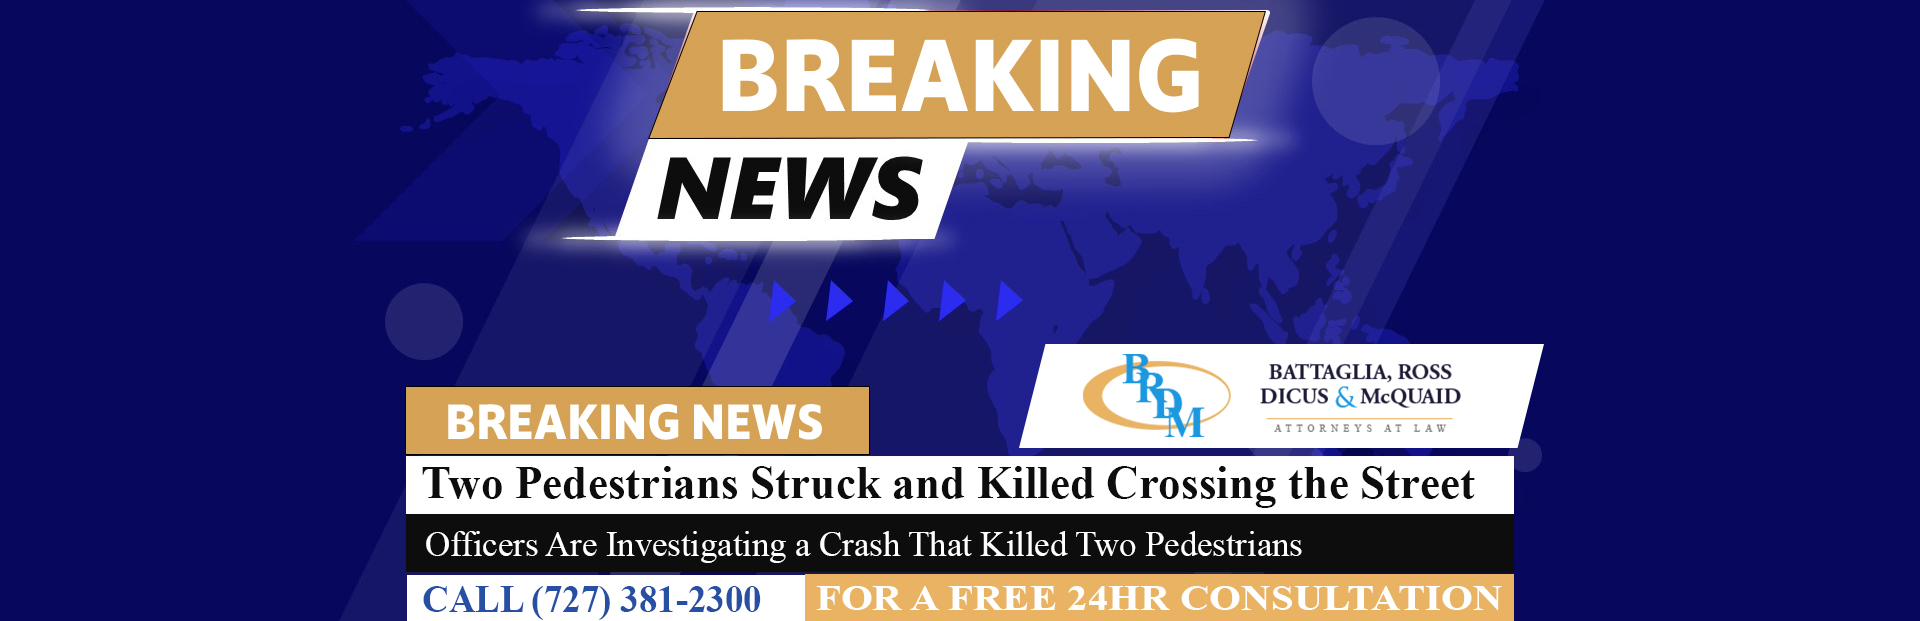 [11-06-22] Two Pedestrians Struck and Killed Crossing 4th Street in St. Petersburg